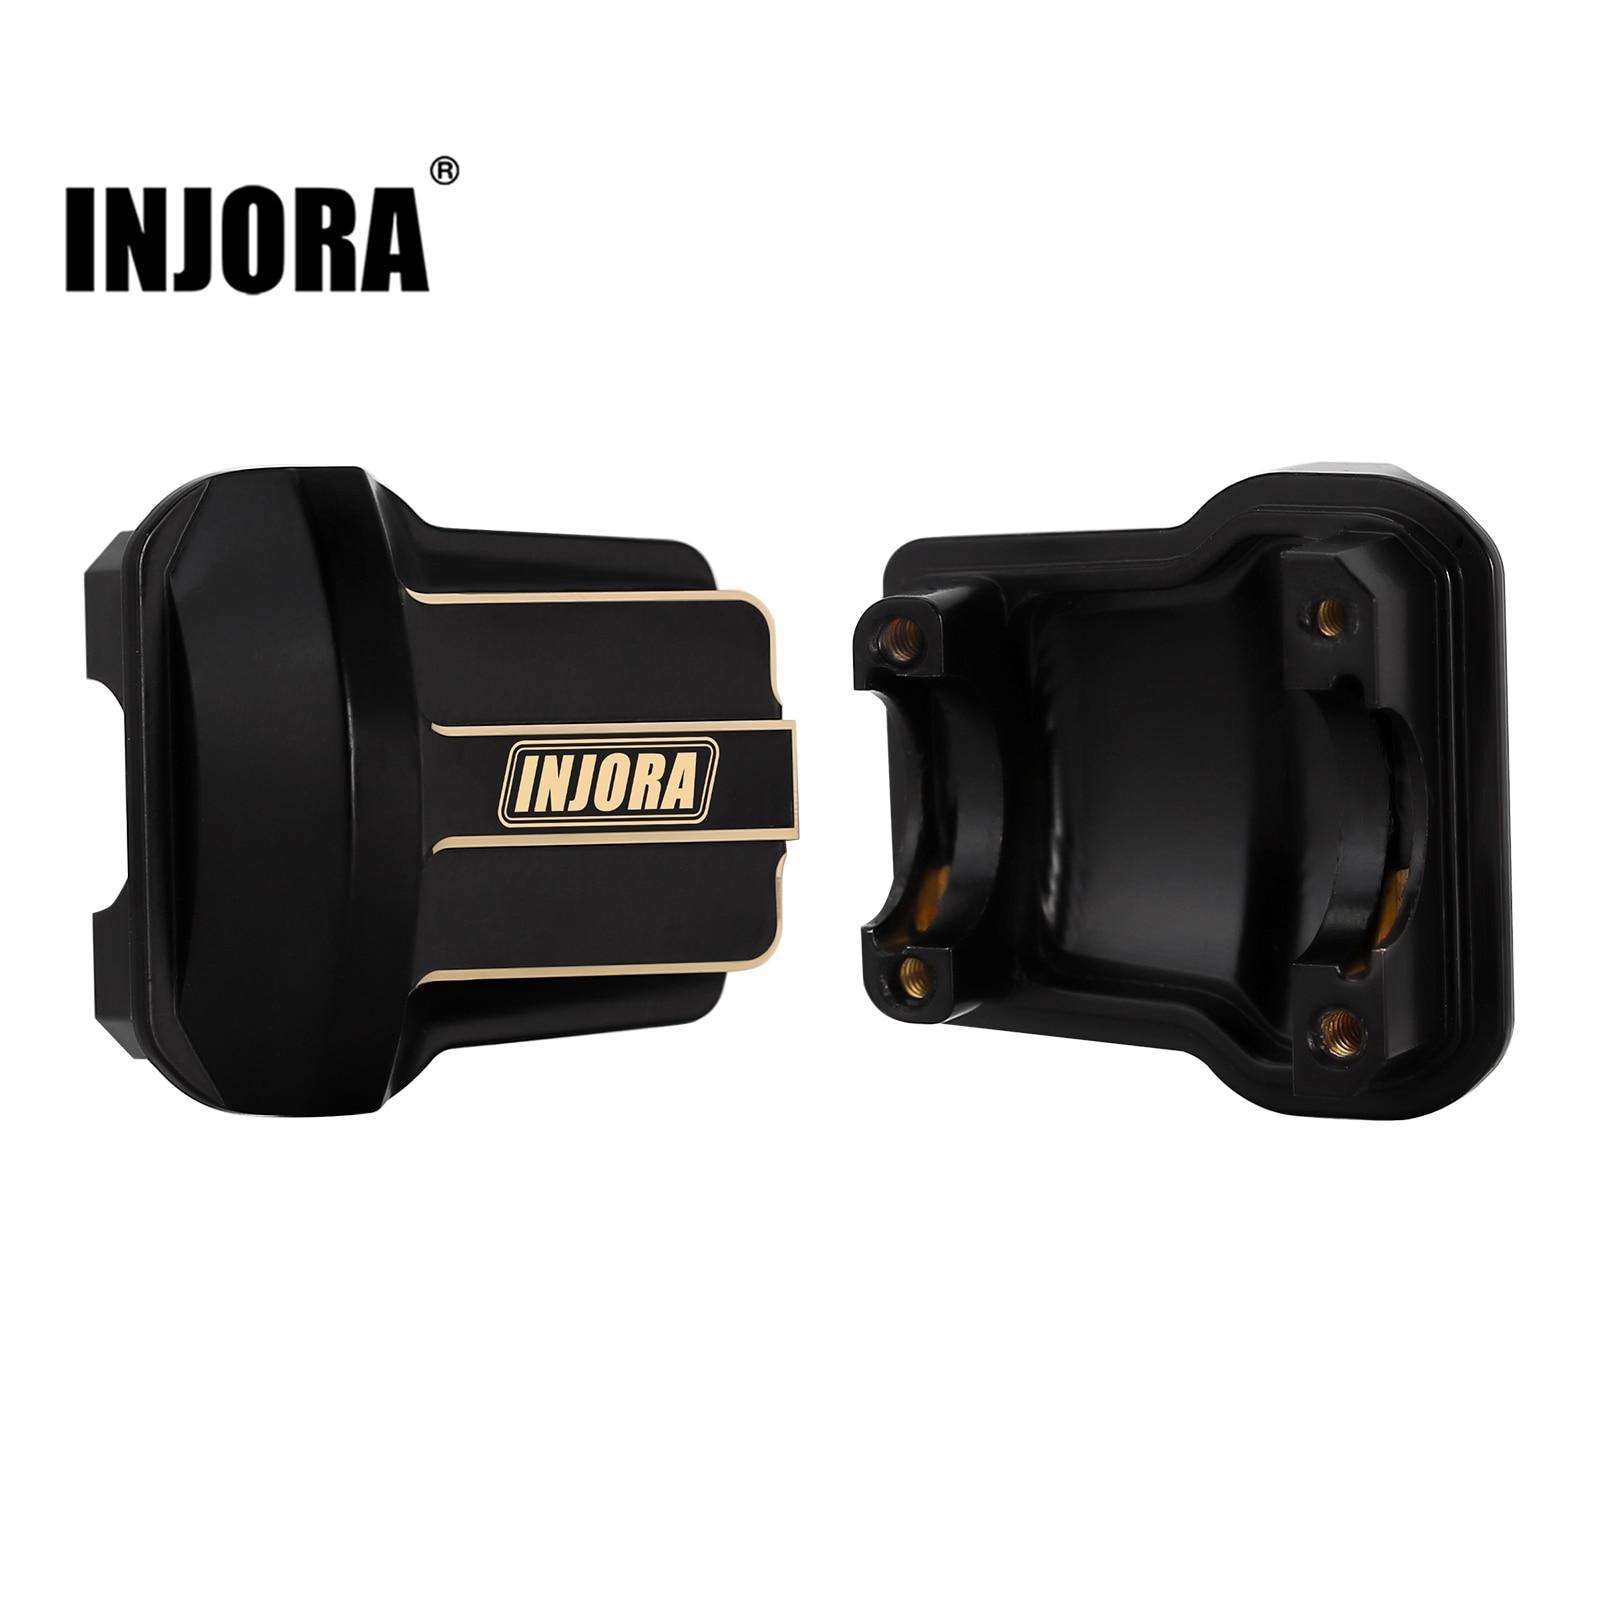 INJORA-11g-Black-Coating-Brass-Front-Rear-Axle-Diff-Cover-for-1-18-RC-Crawler-Car.jpg